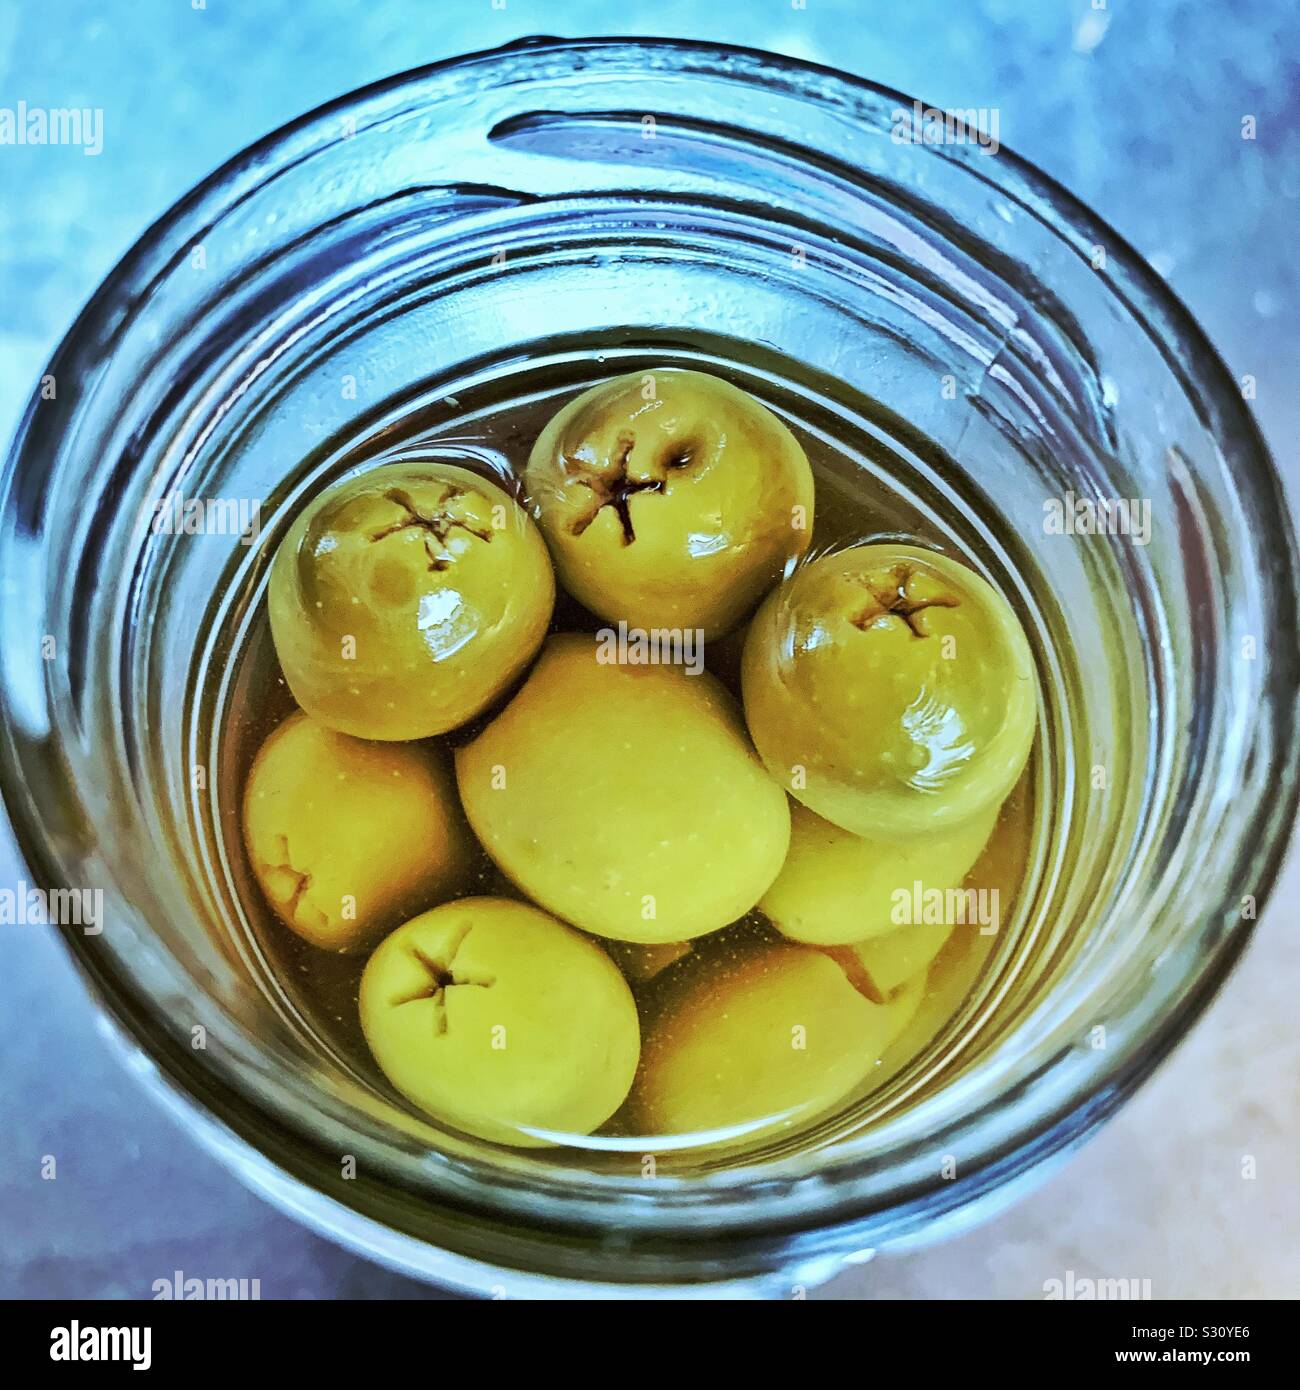 Top view of green olives in glass jar Stock Photo